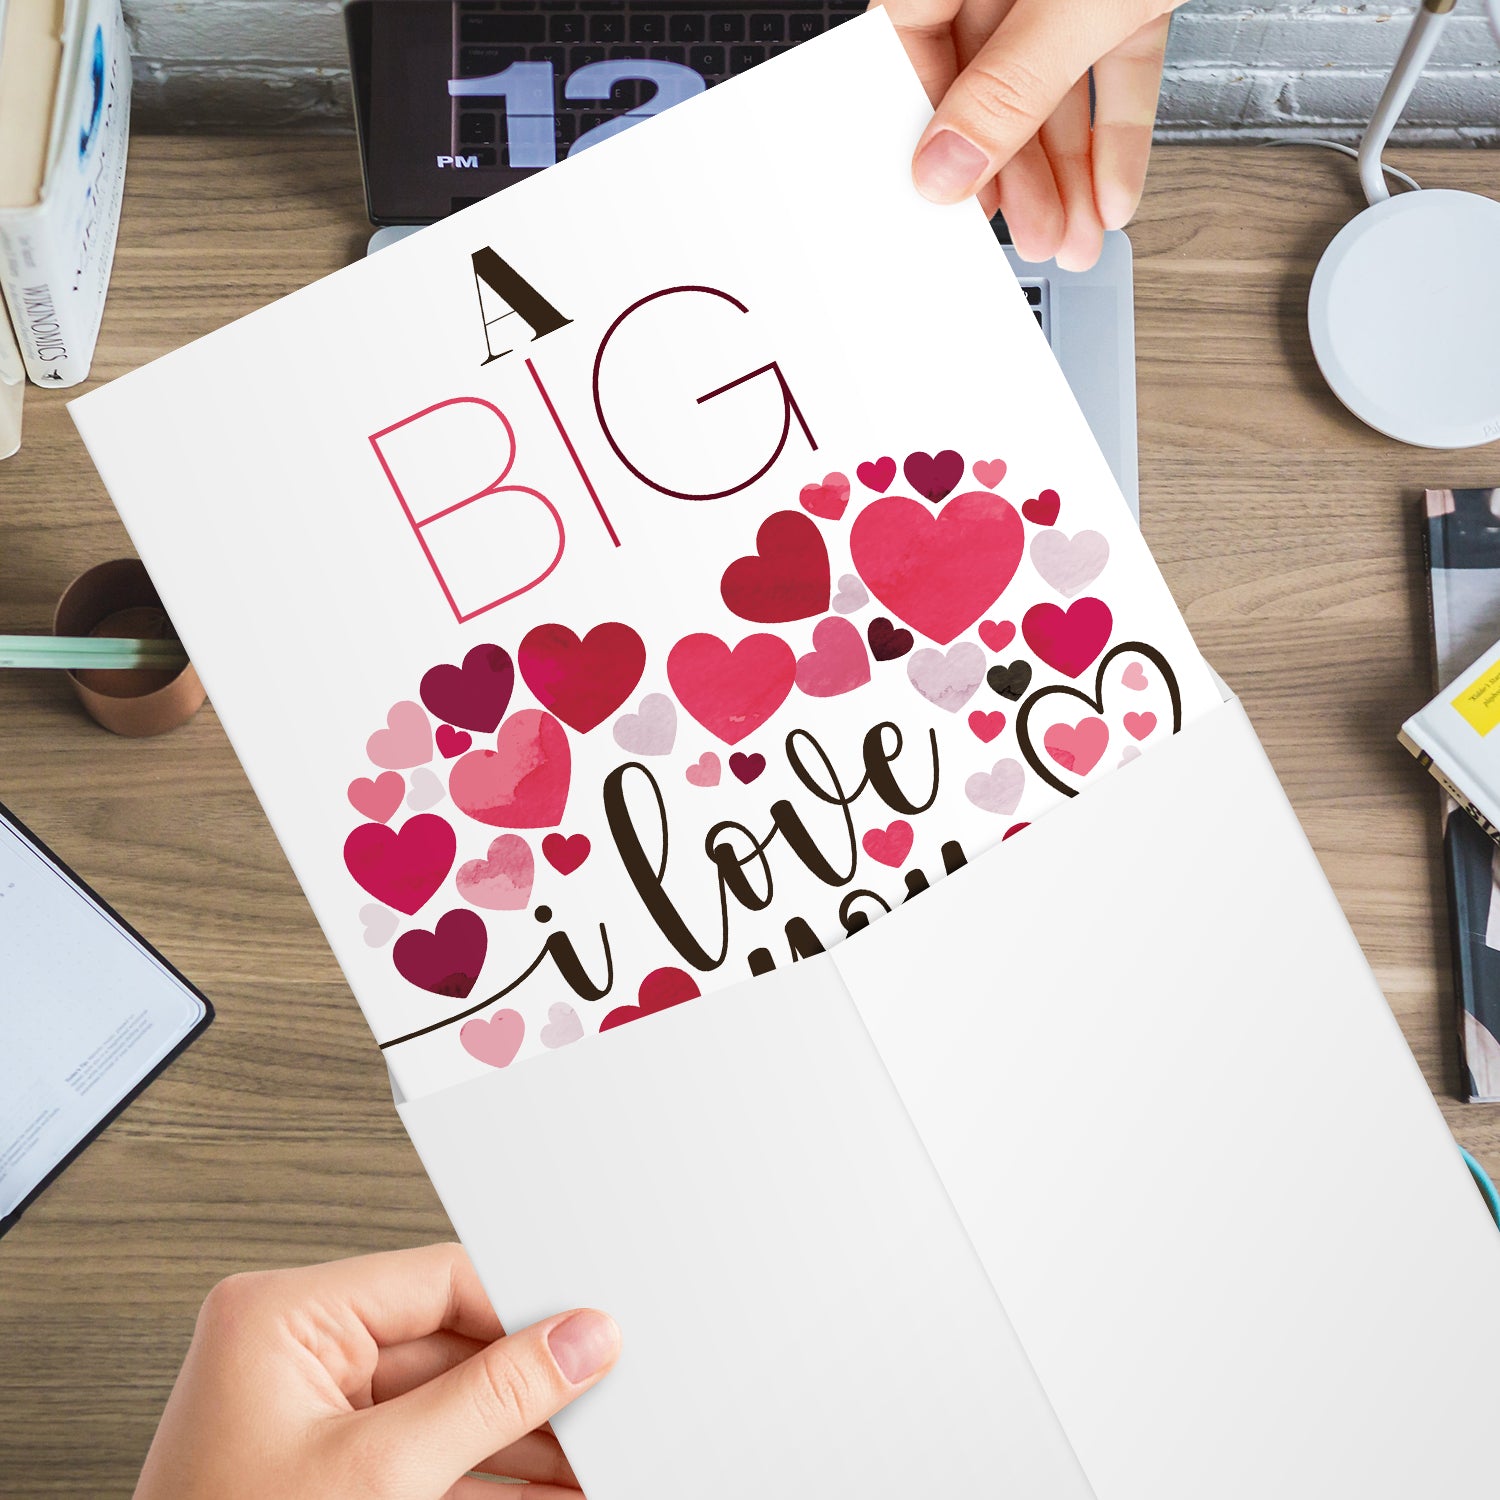 "A Big I Love You" Big Valentine's Day Greeting Cards and Envelopes – 8.5" x 11" Large Jumbo Size Valentines Card – 2 per Pack